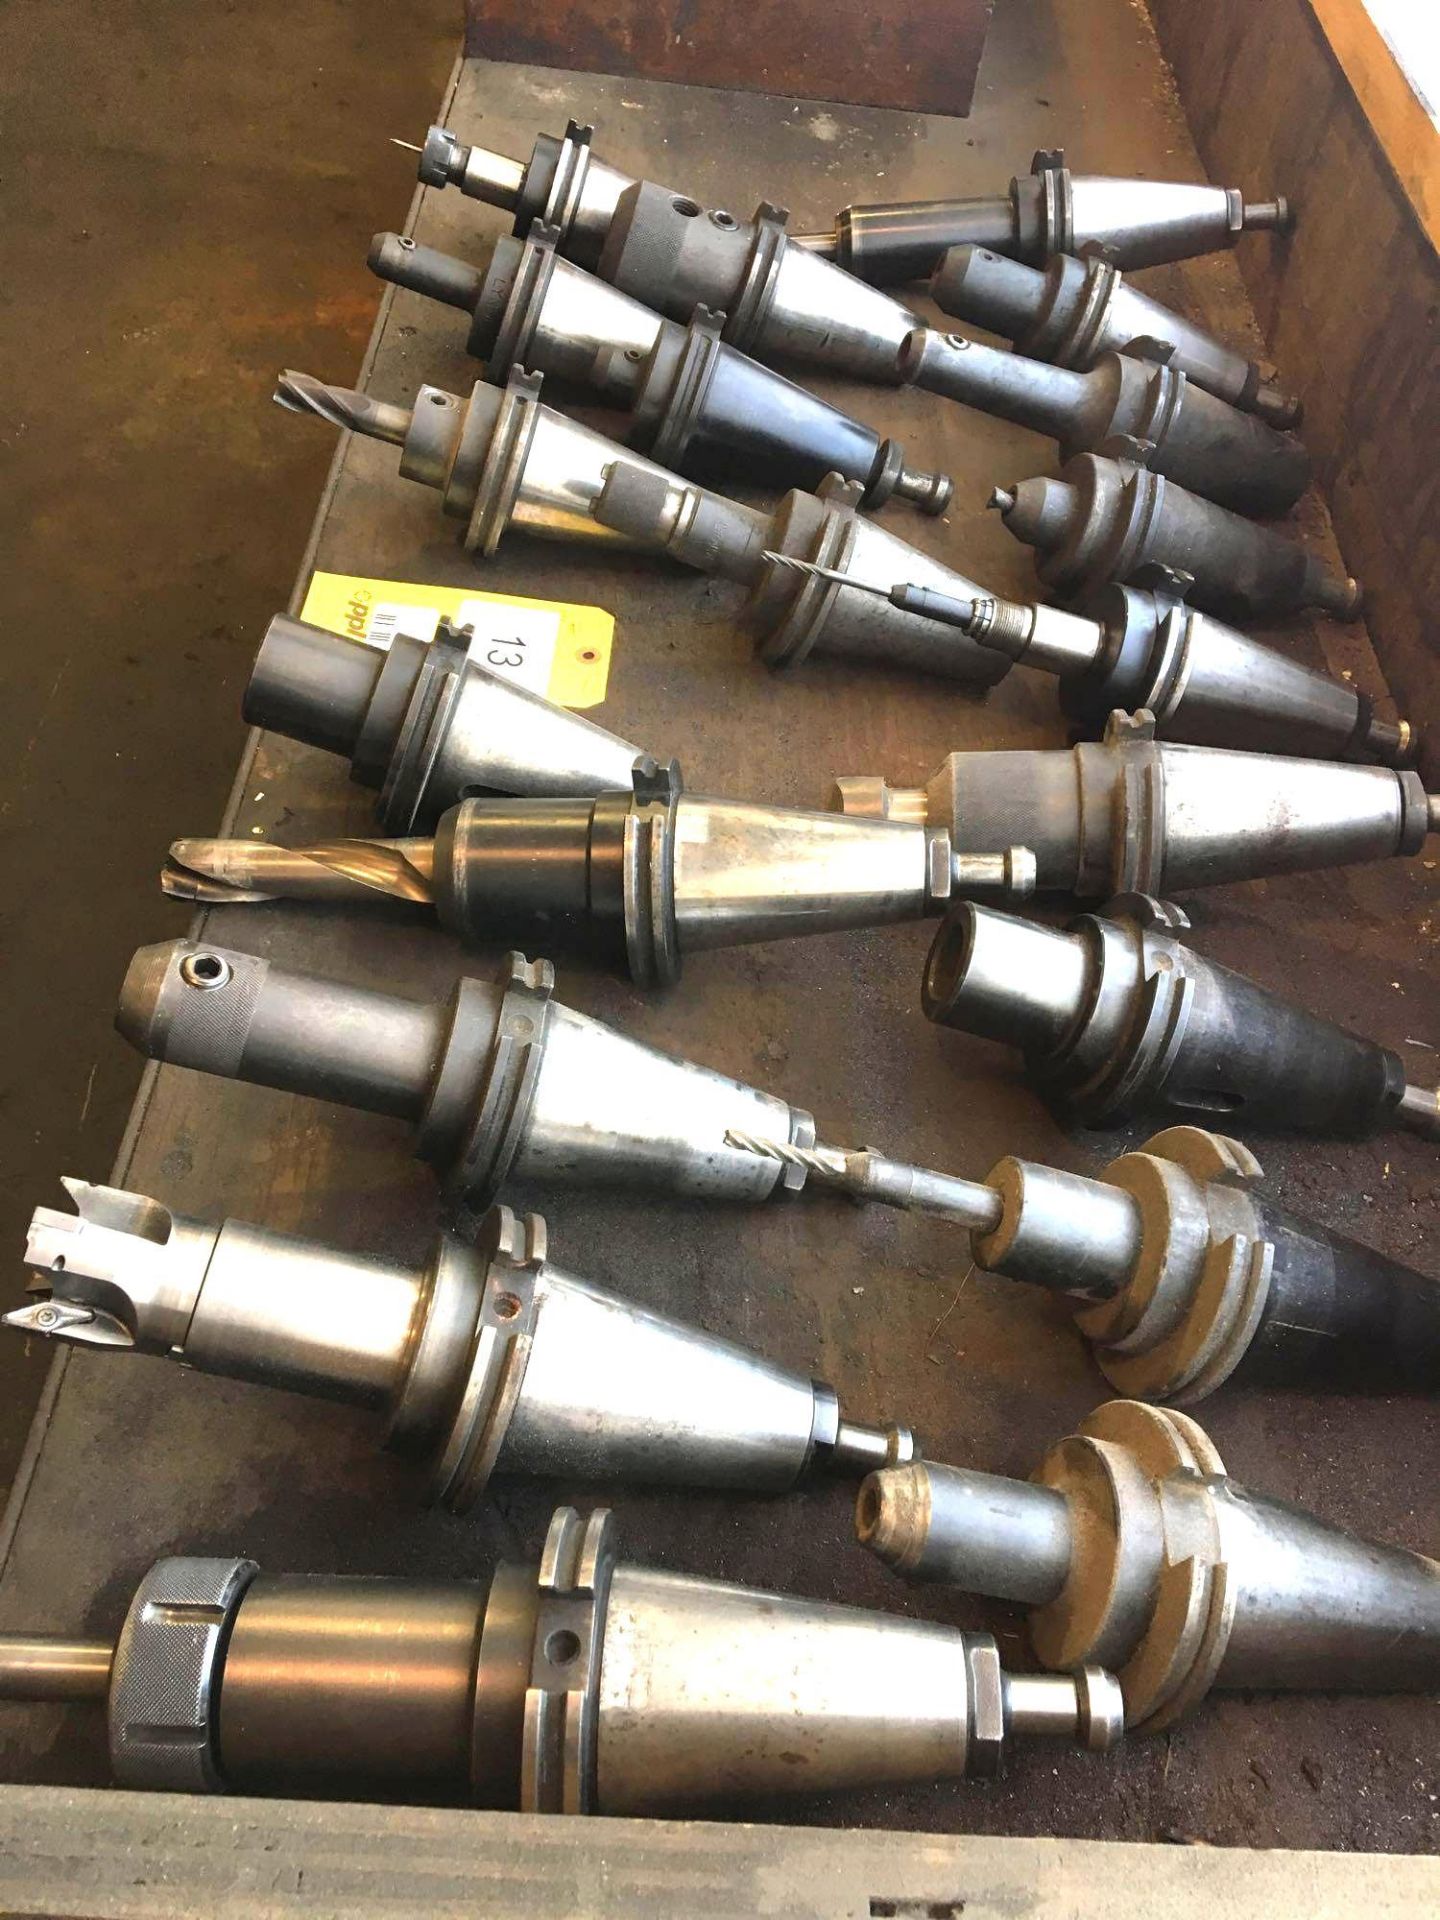 LOT: Approximately 20 Cat 50 Tool Holders